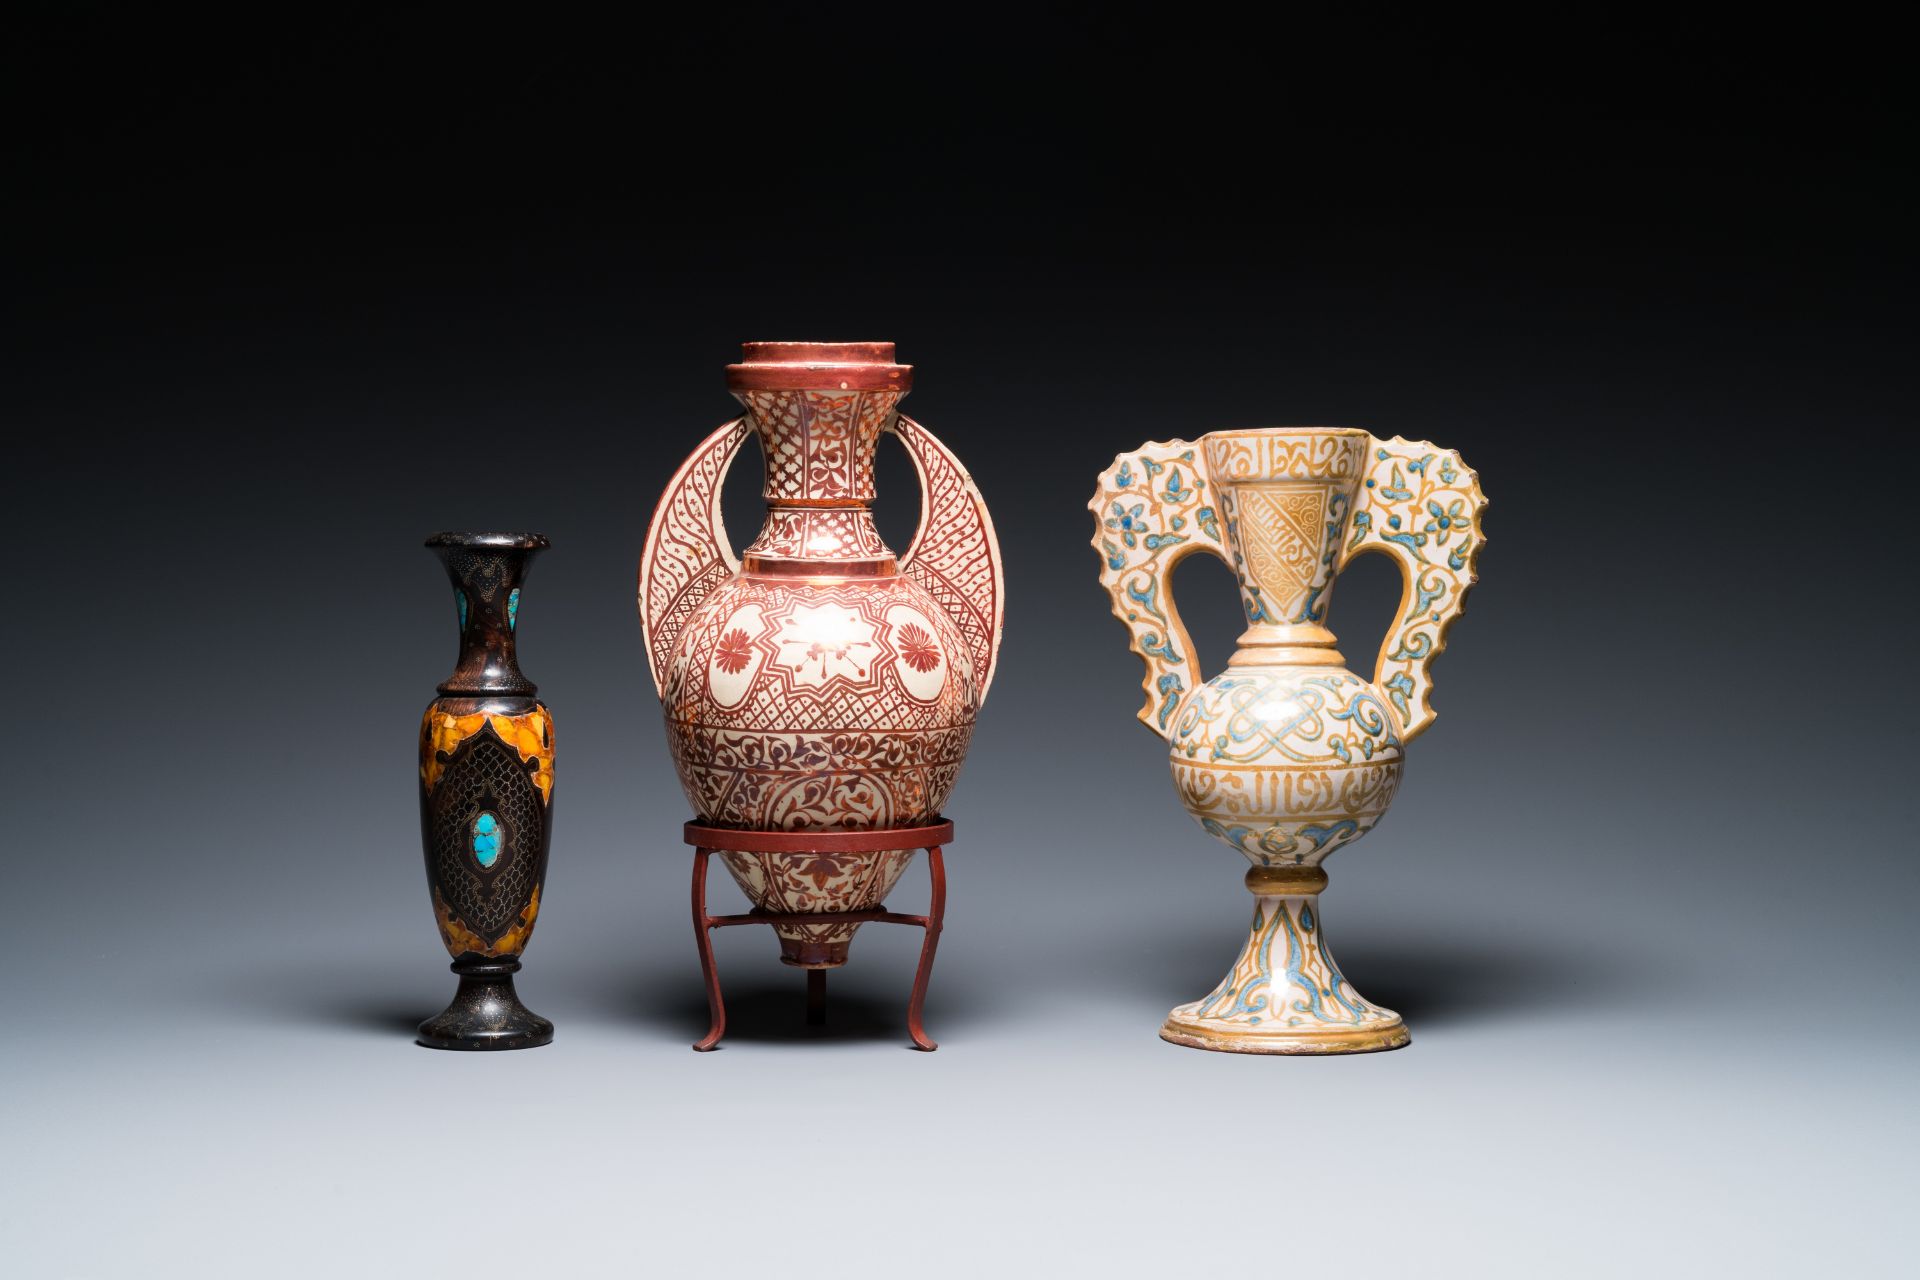 Two Hispano-Moresque lustre-glazed 'Alhambra' vases and a stone-inlaid wooden vase, Spain and Northe